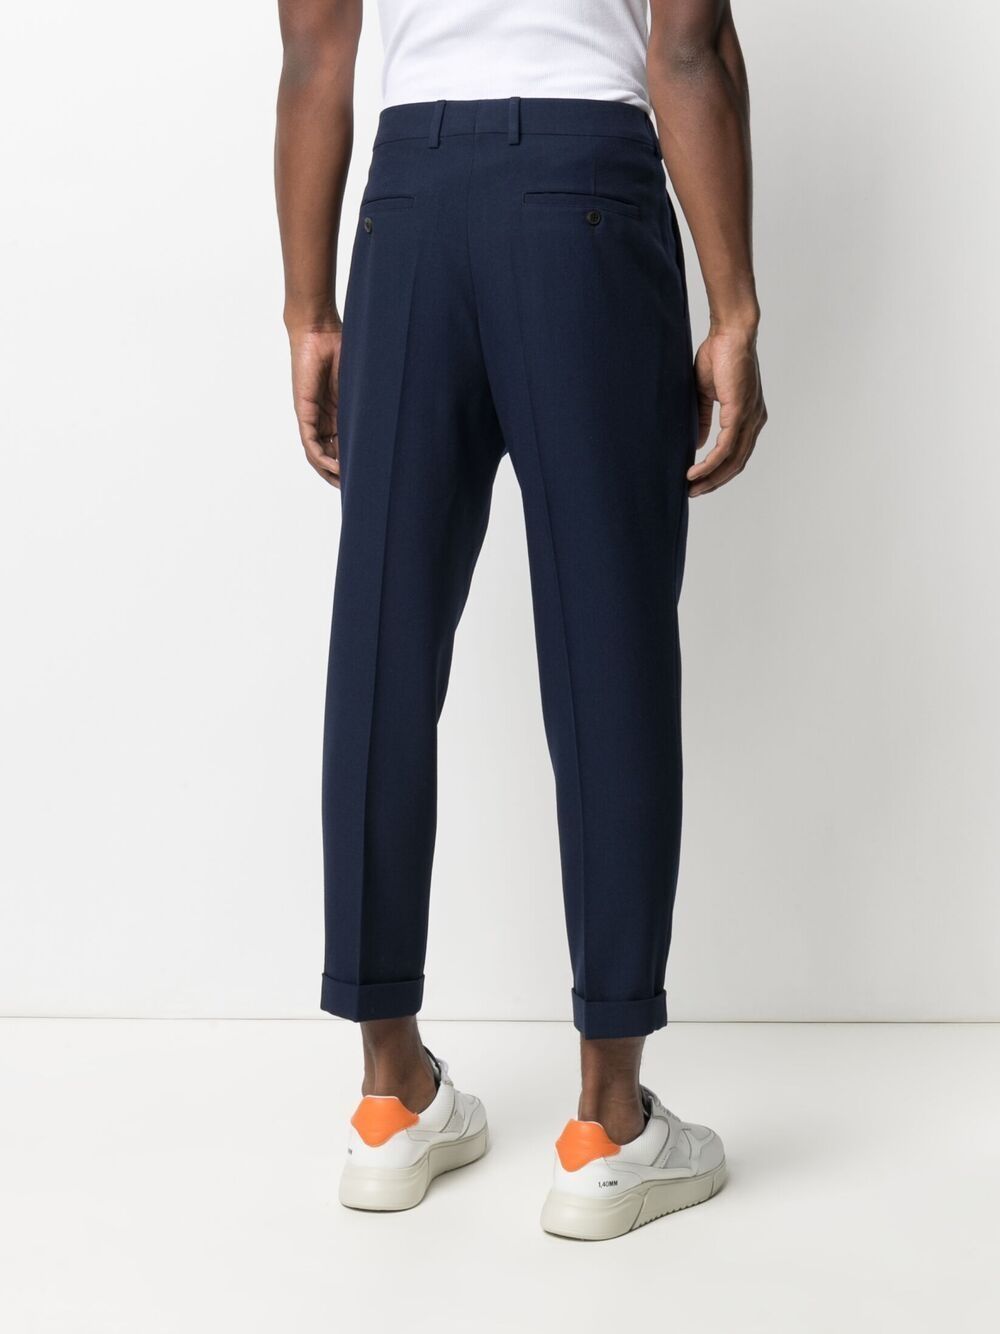 Shop AMI Paris carrot fit cuffed hem trousers with Express Delivery ...